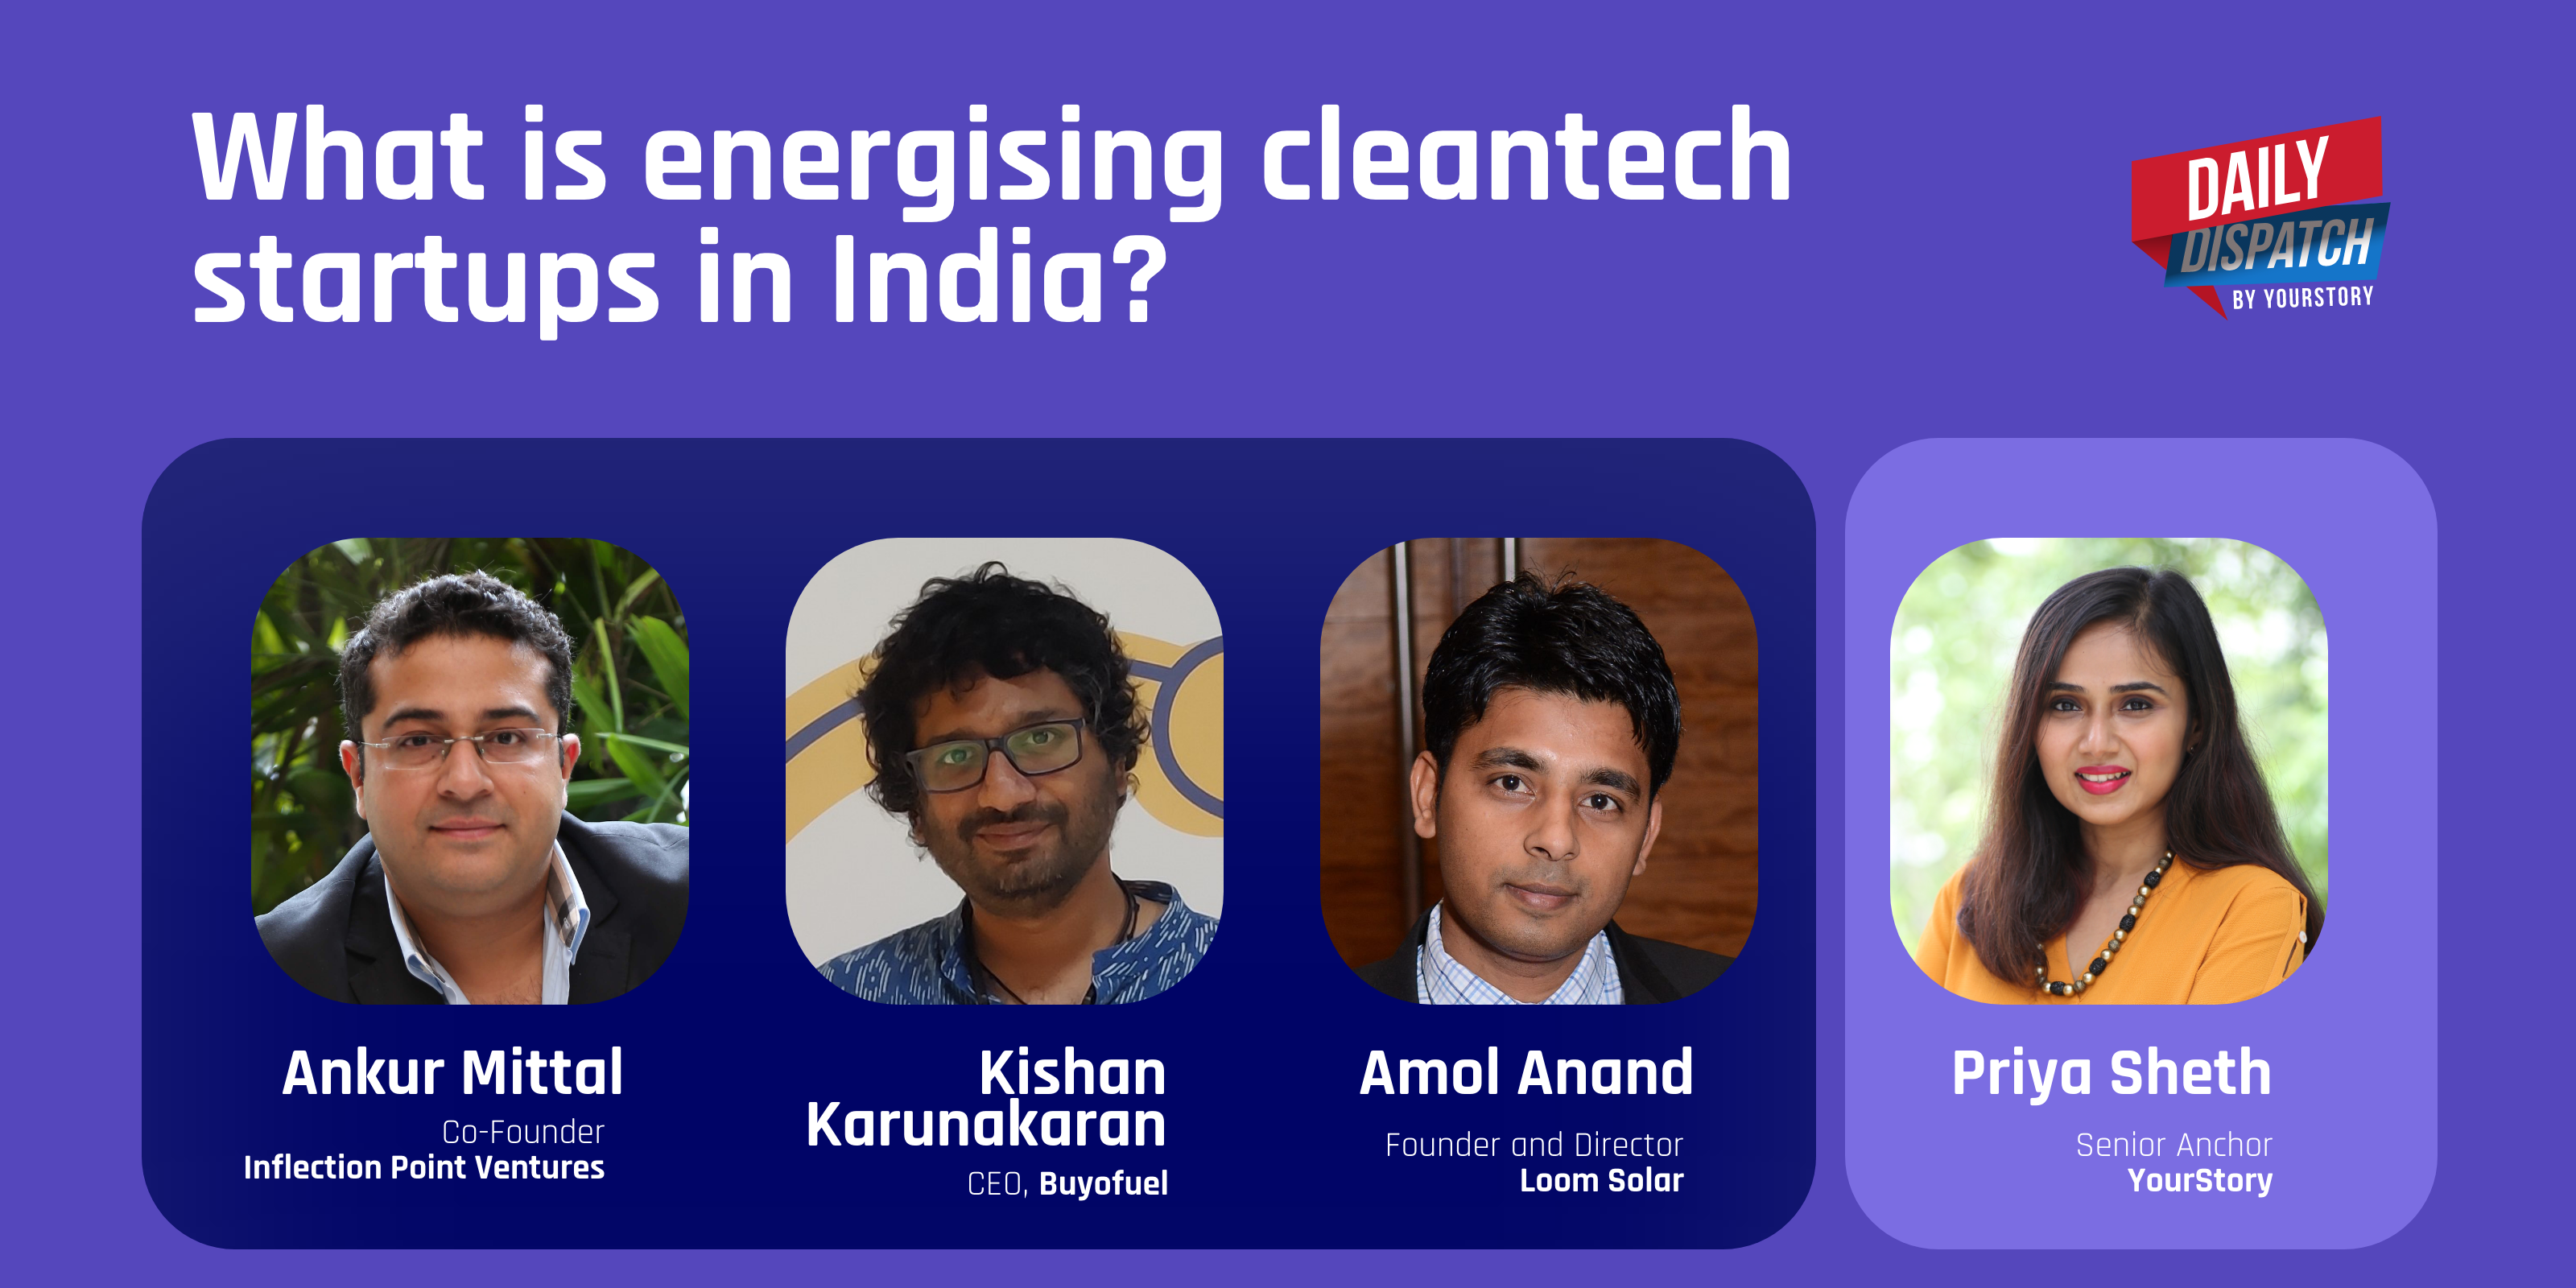 What is fueling the growth for cleantech startups in India?